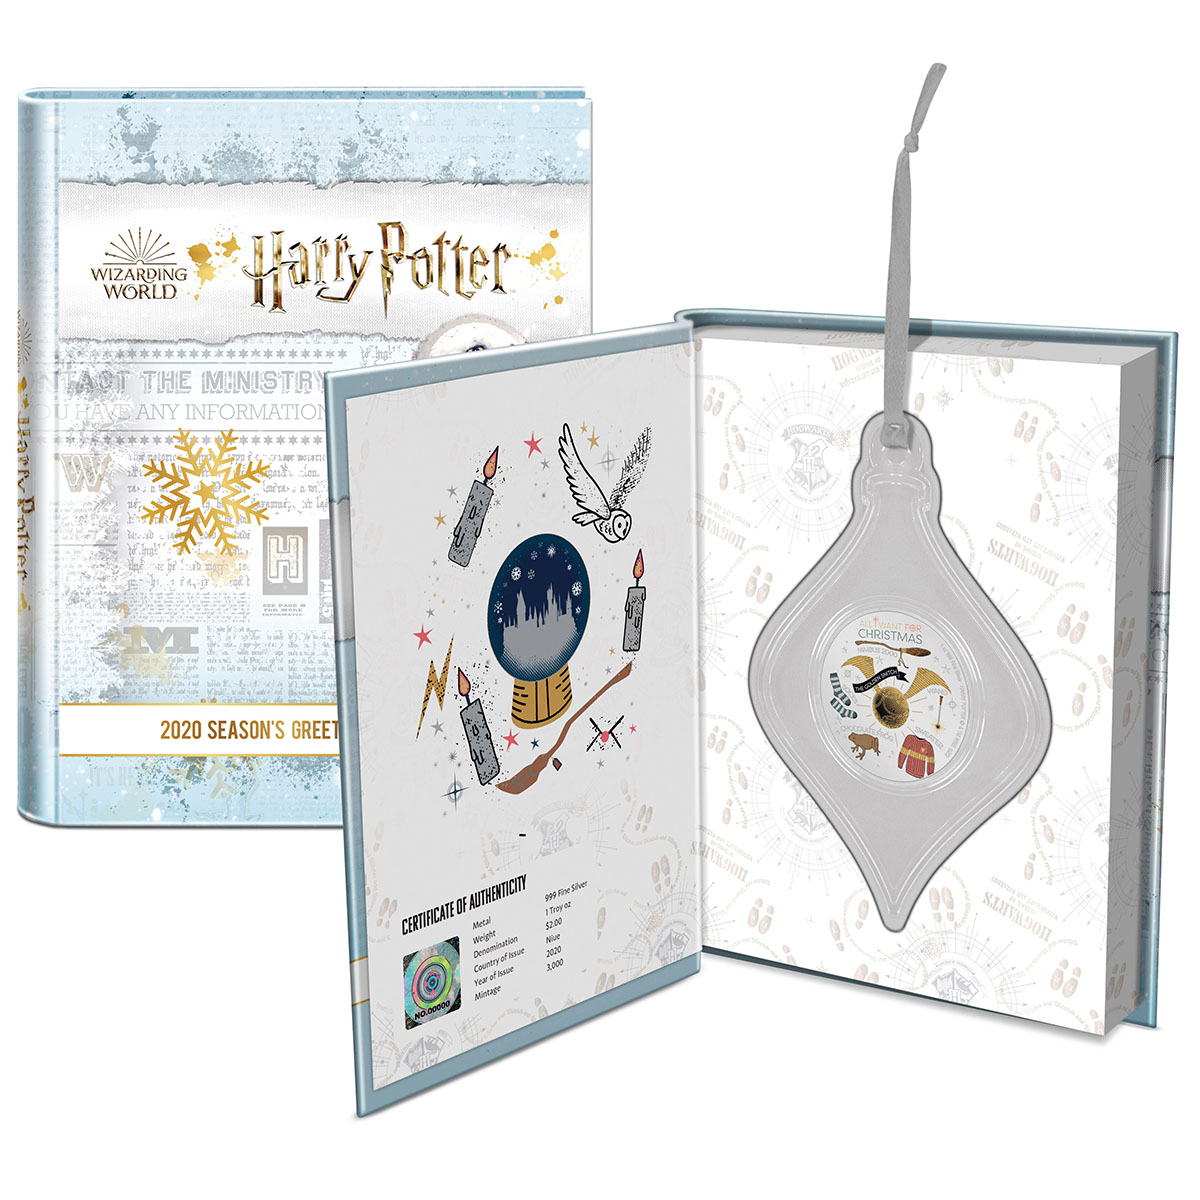 HARRY POTTER™ Season’s Greetings 1oz Silver Coin